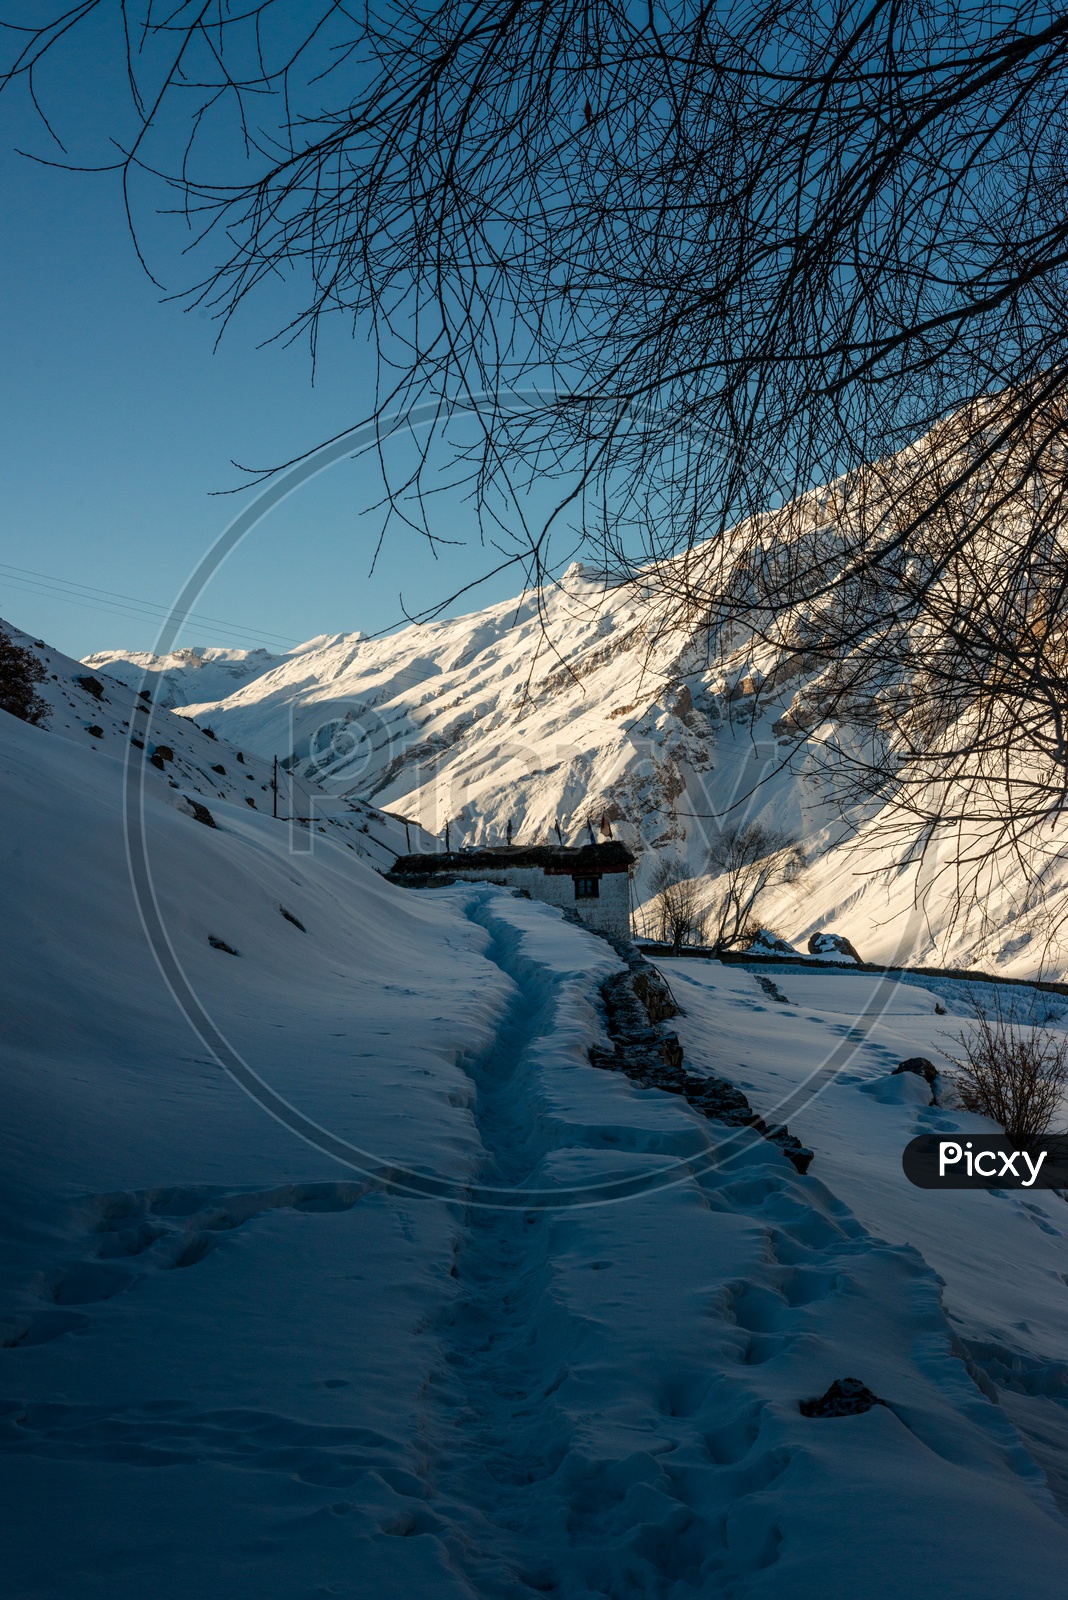 Trekking Path in Snow at Spiti Valley Covered with Snow on Mountains